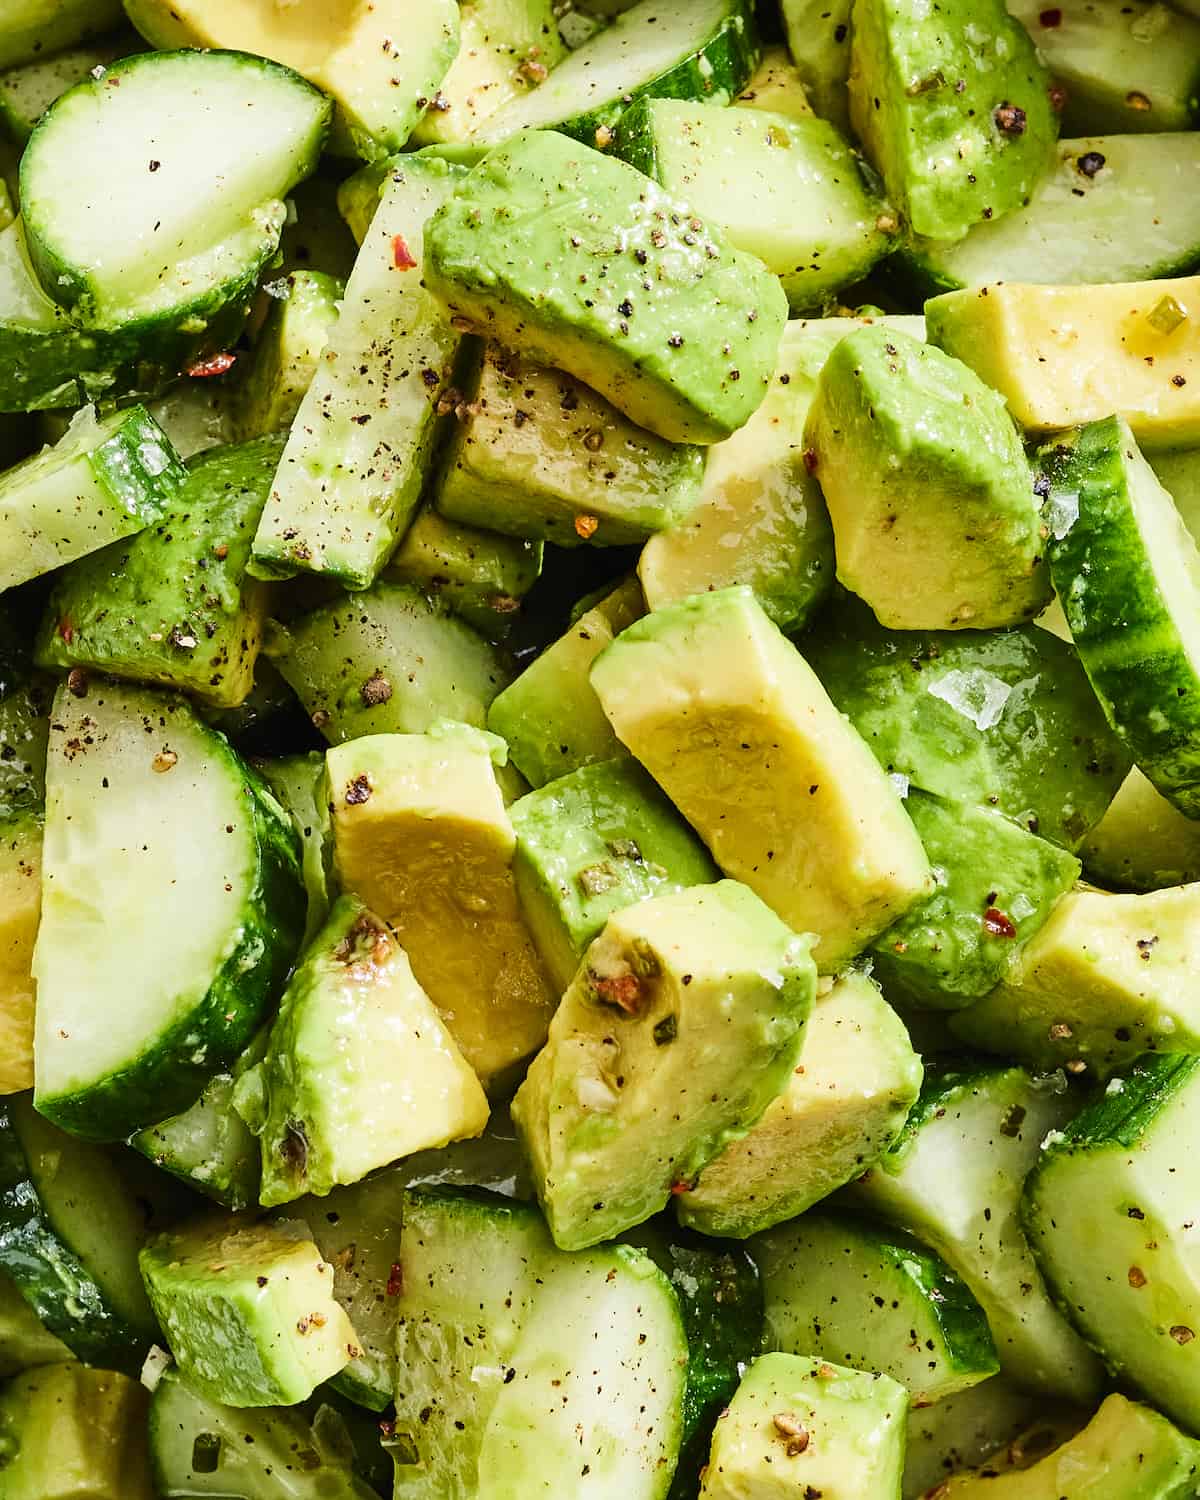 Diced cucumbers and diced avocado seasoned with flaky sea salt, pepper, and olive oil.  